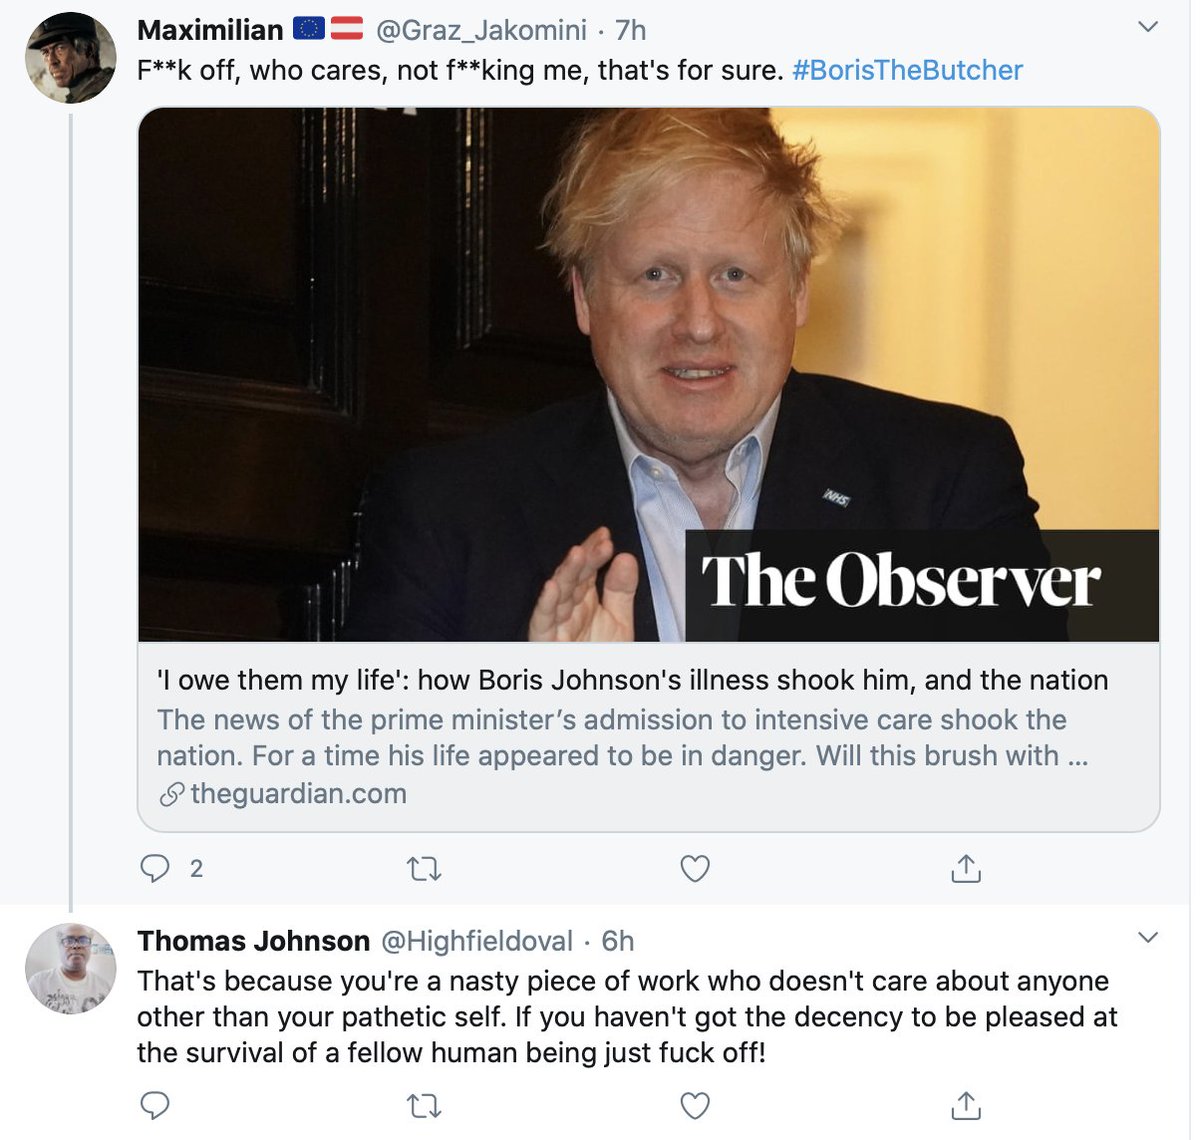 This Thomas chap didn't like it when I suggested that Boris Johnson, while currently grateful, will still screw over the NHS staff who saved him. Turns out Thomas doesn't like it when anyone suggests that. 'Thomas' had a busy night last night.